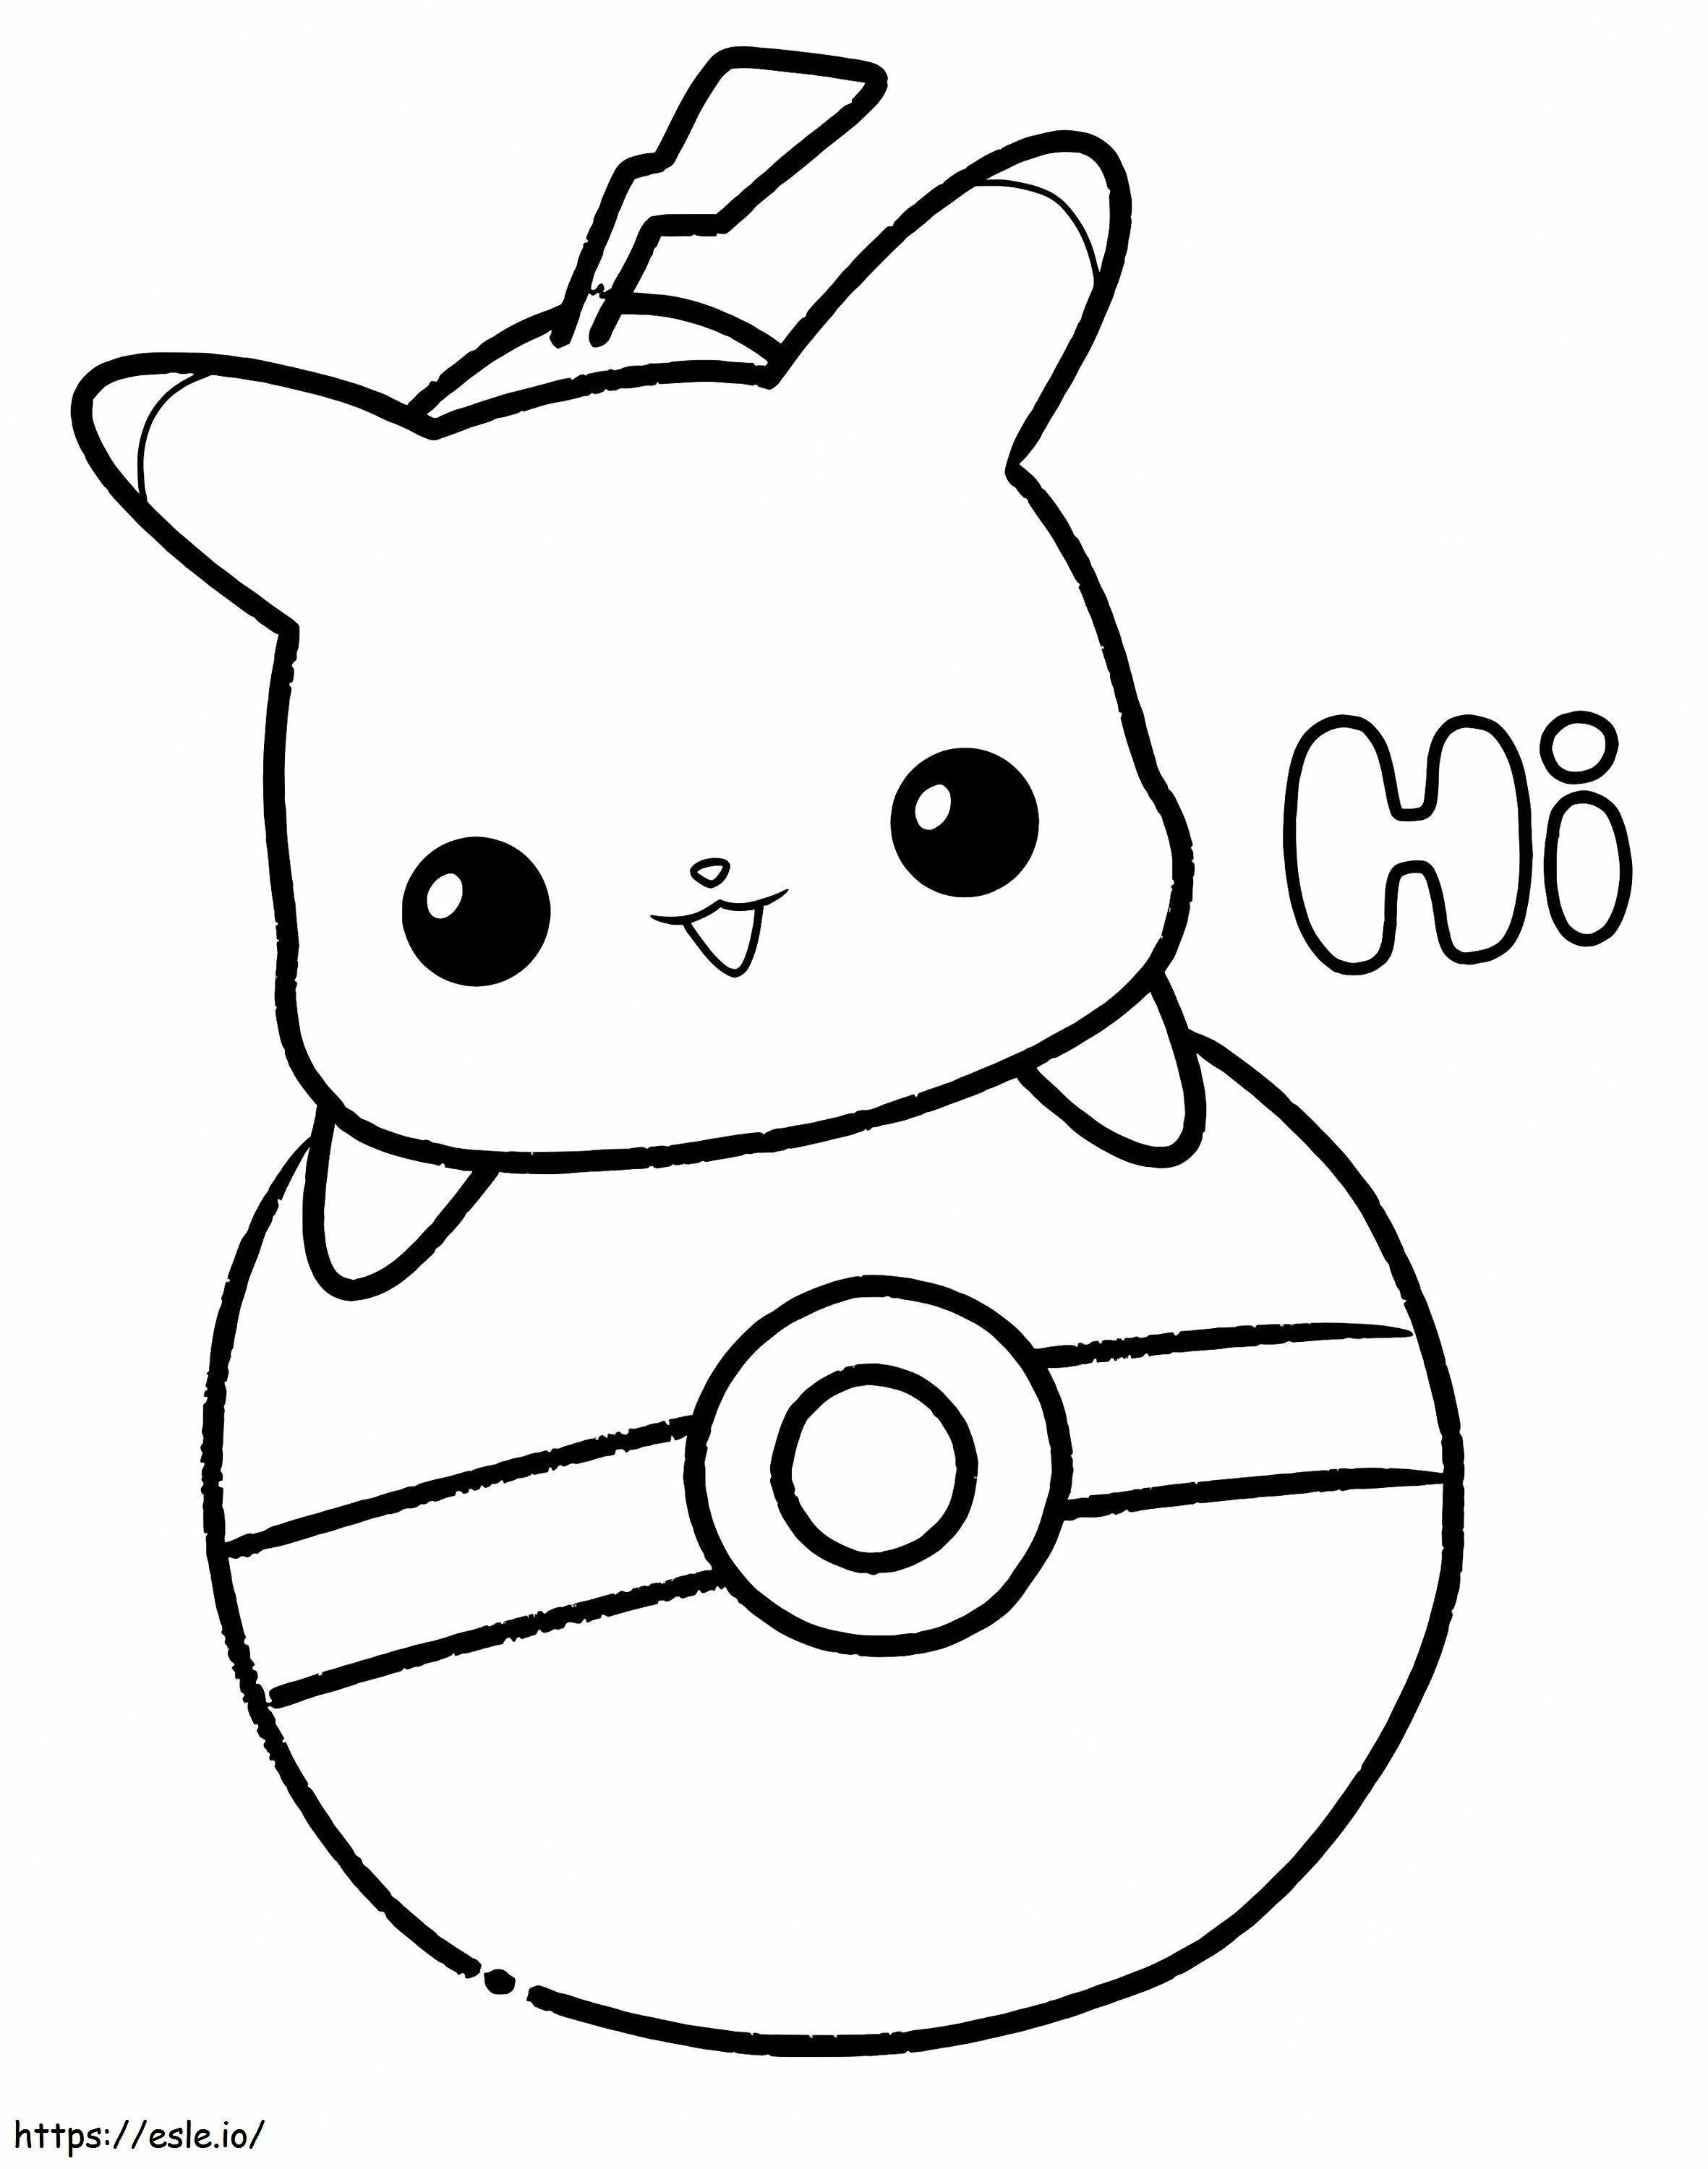 Pikachu Is Cute coloring page